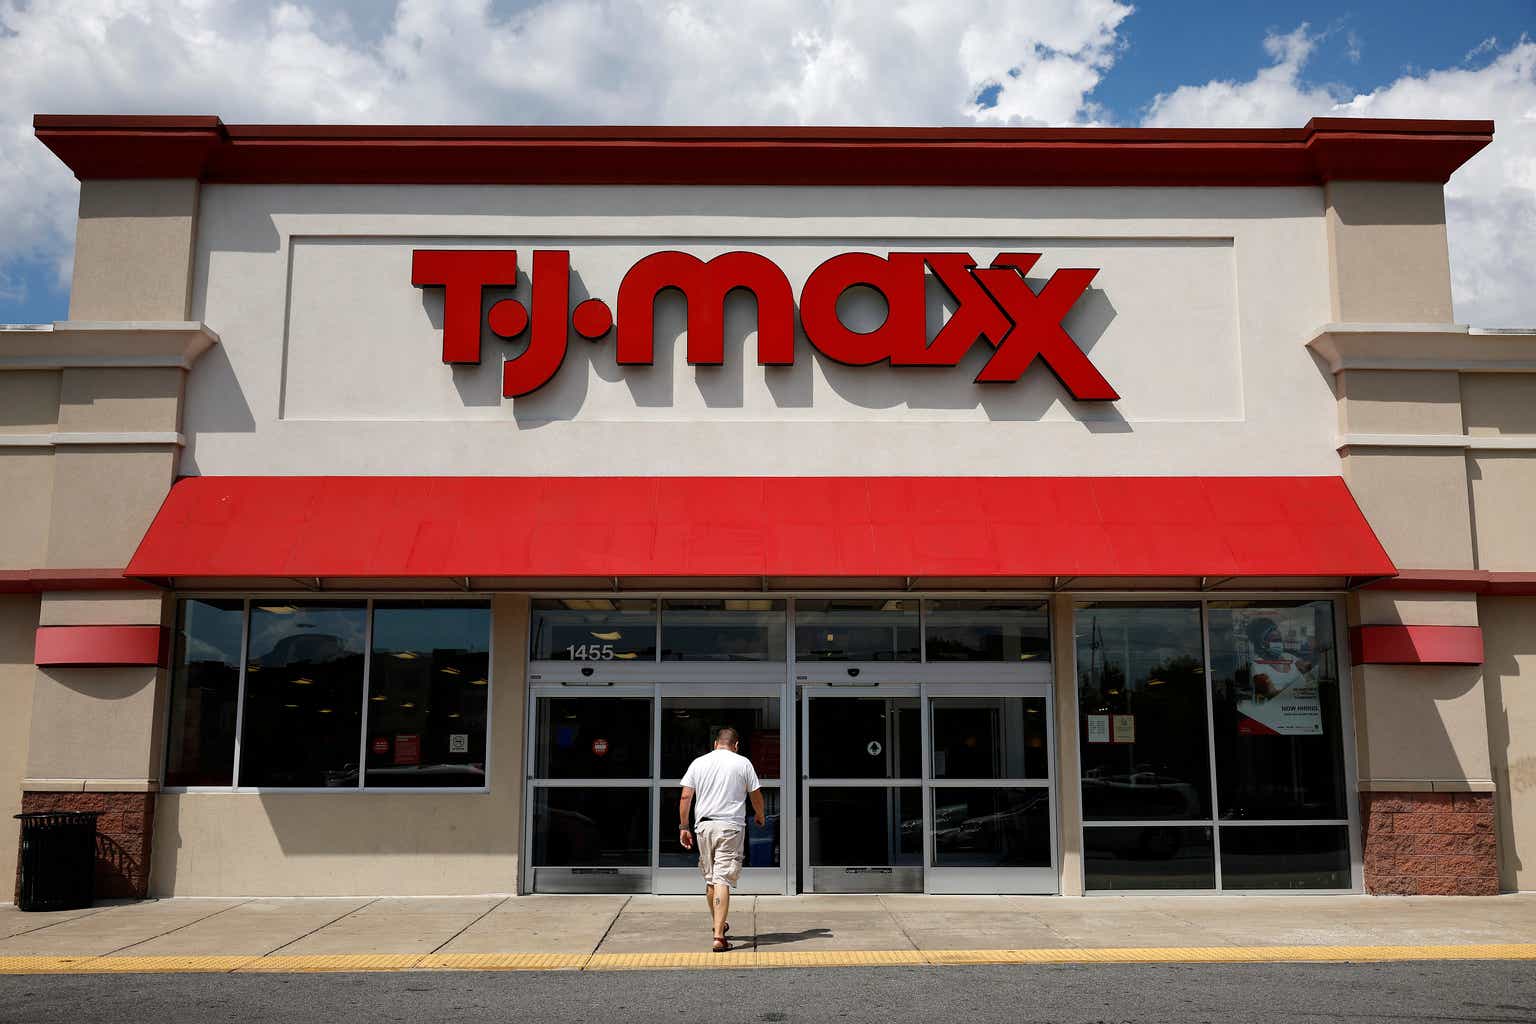 Burlington will be a big beneficiary from Macy's store closures